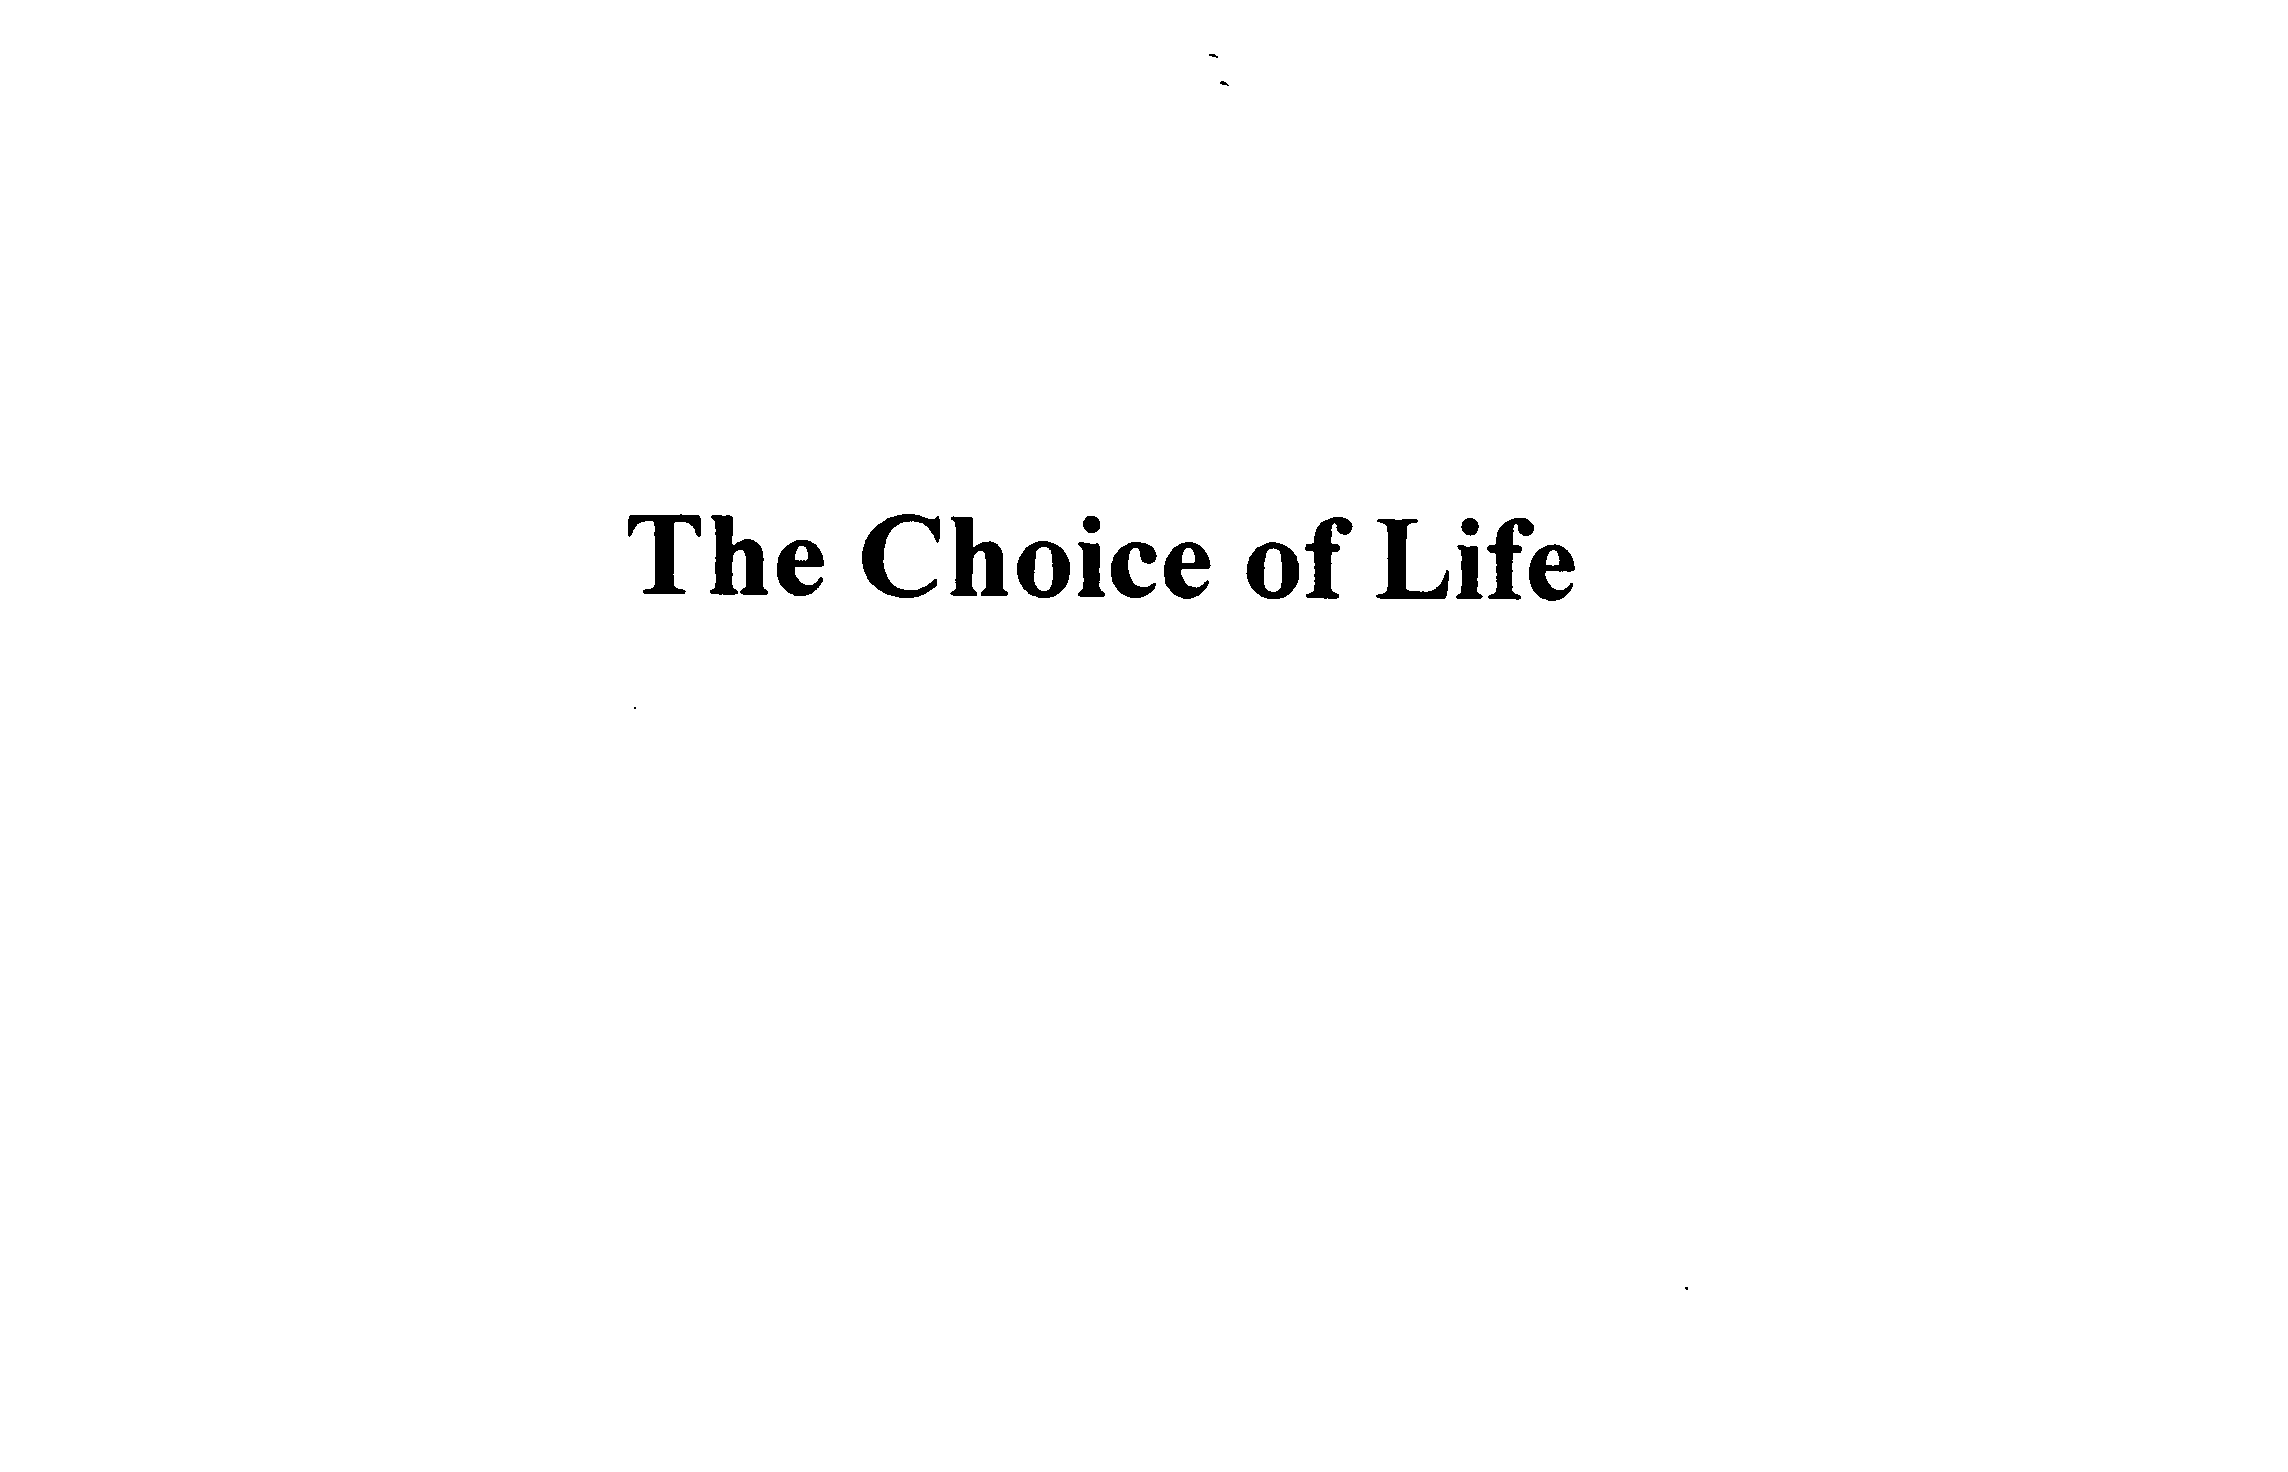  THE CHOICE OF LIFE